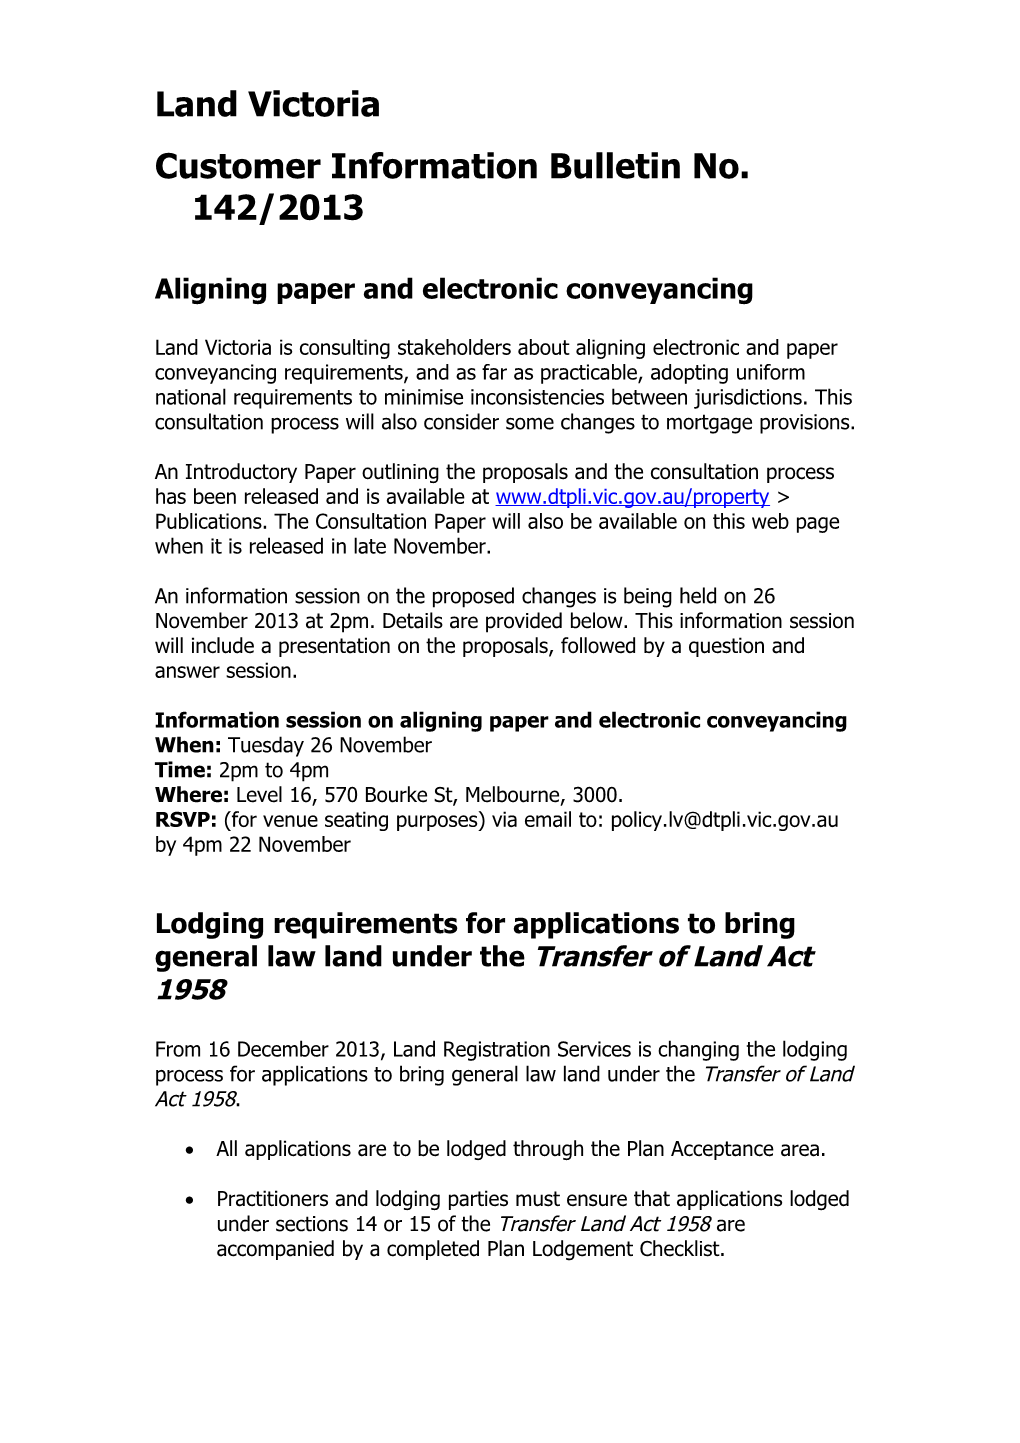 Aligning Paper and Electronic Conveyancing